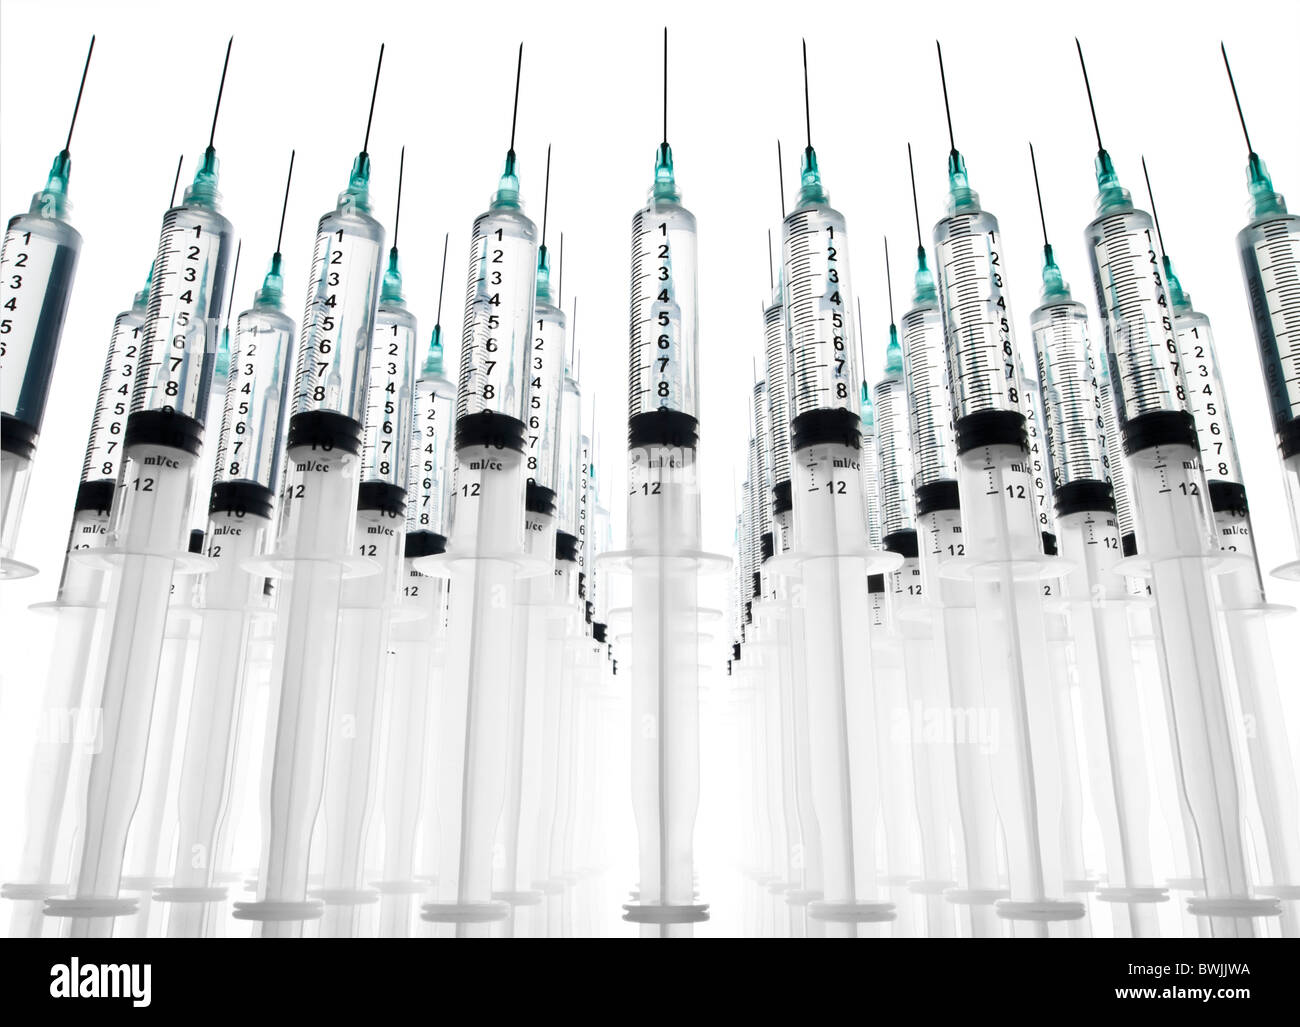 Rows of syringes Stock Photo